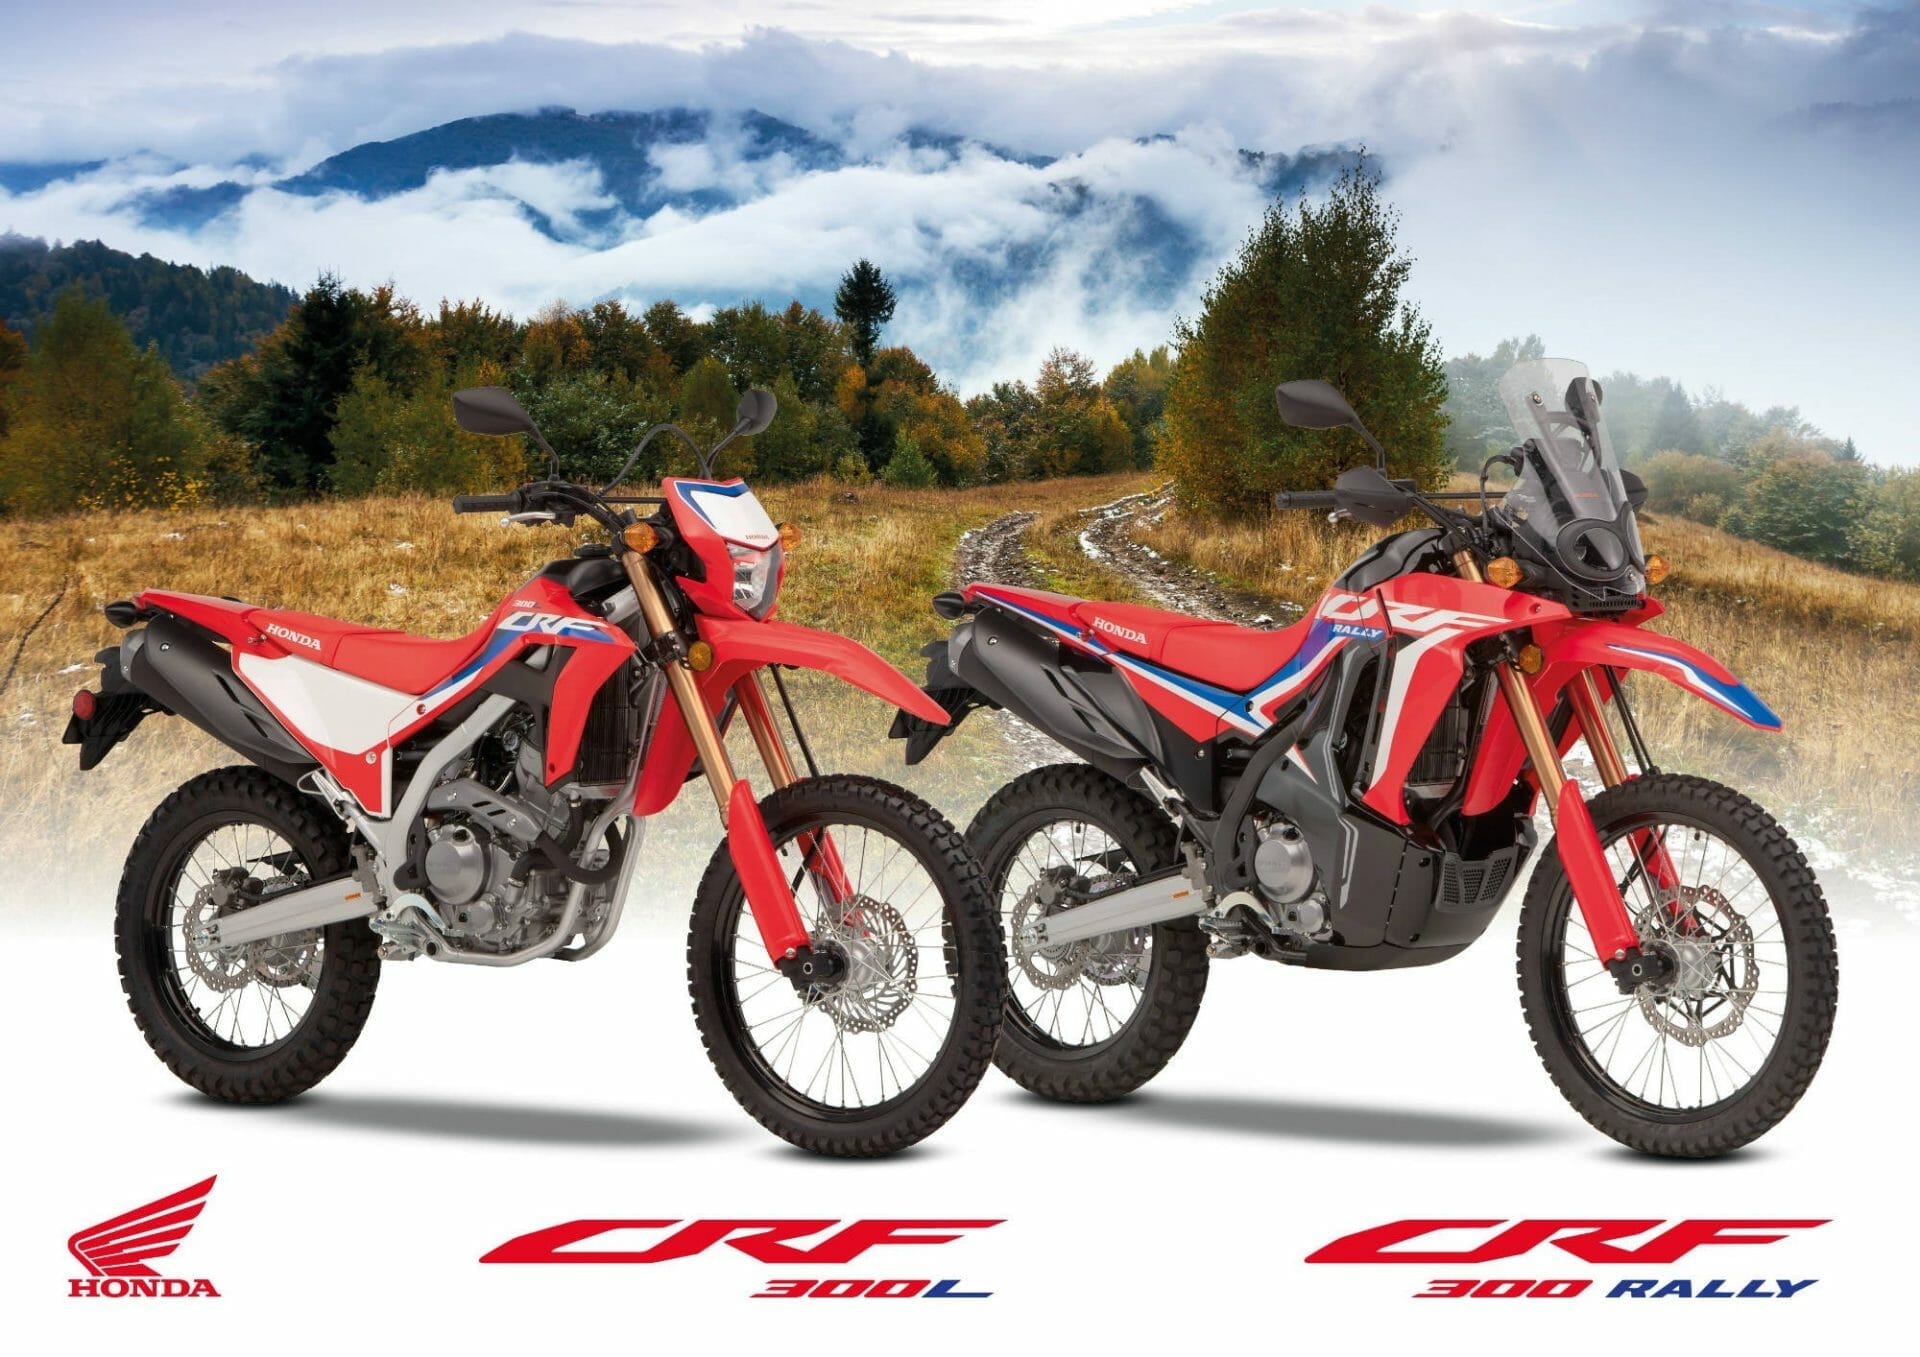 New Honda CRF300L and CRF300 Rally presented
- also in the MOTORCYCLES.NEWS APP